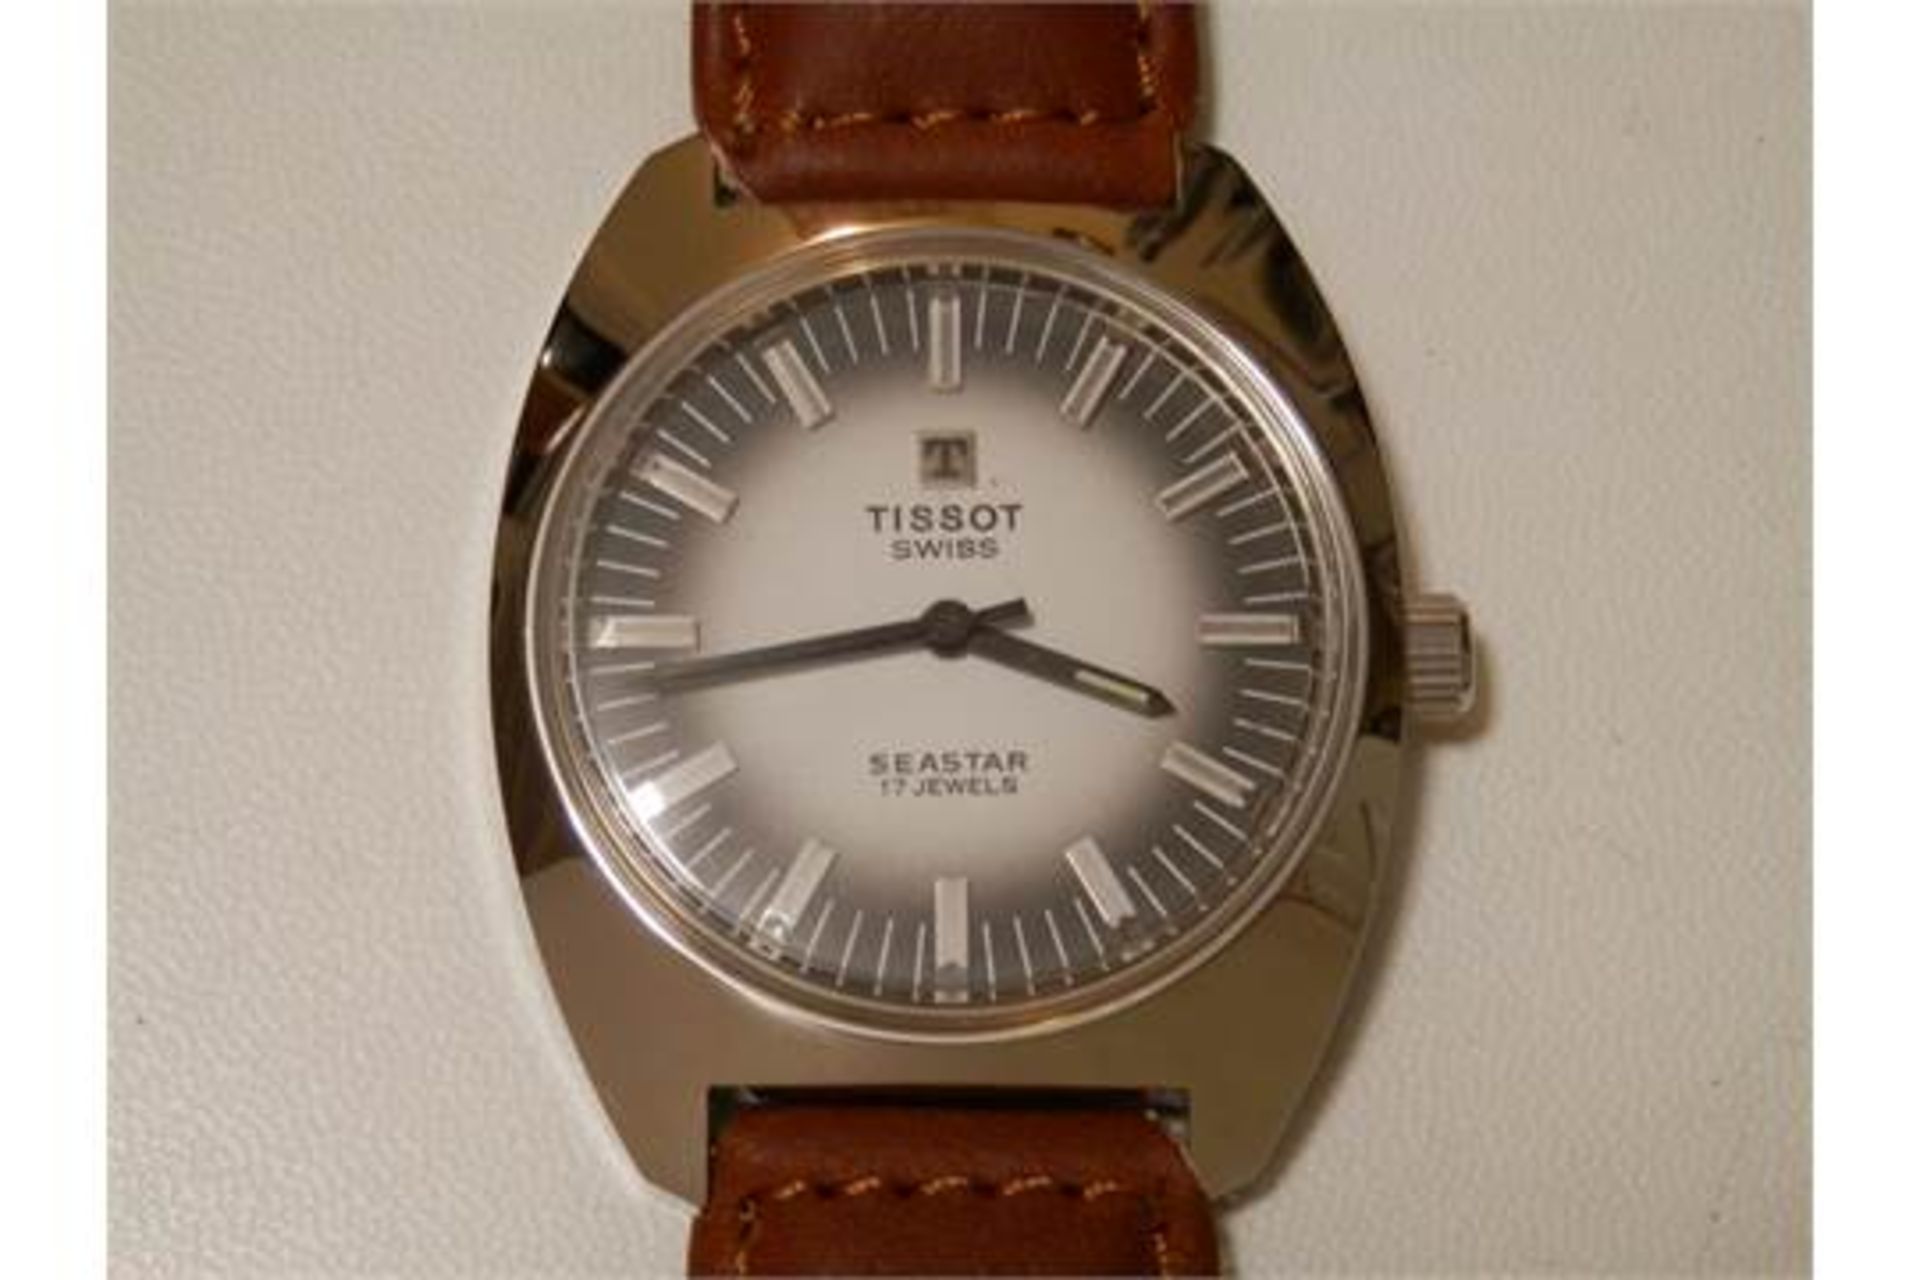 SUPERB GENTS TISSOT SEASTAR, POSSIBLY NEW/OLD STOCK 1970S 17 JEWEL SWISS WATCH (1 of 3 available) - Image 3 of 10